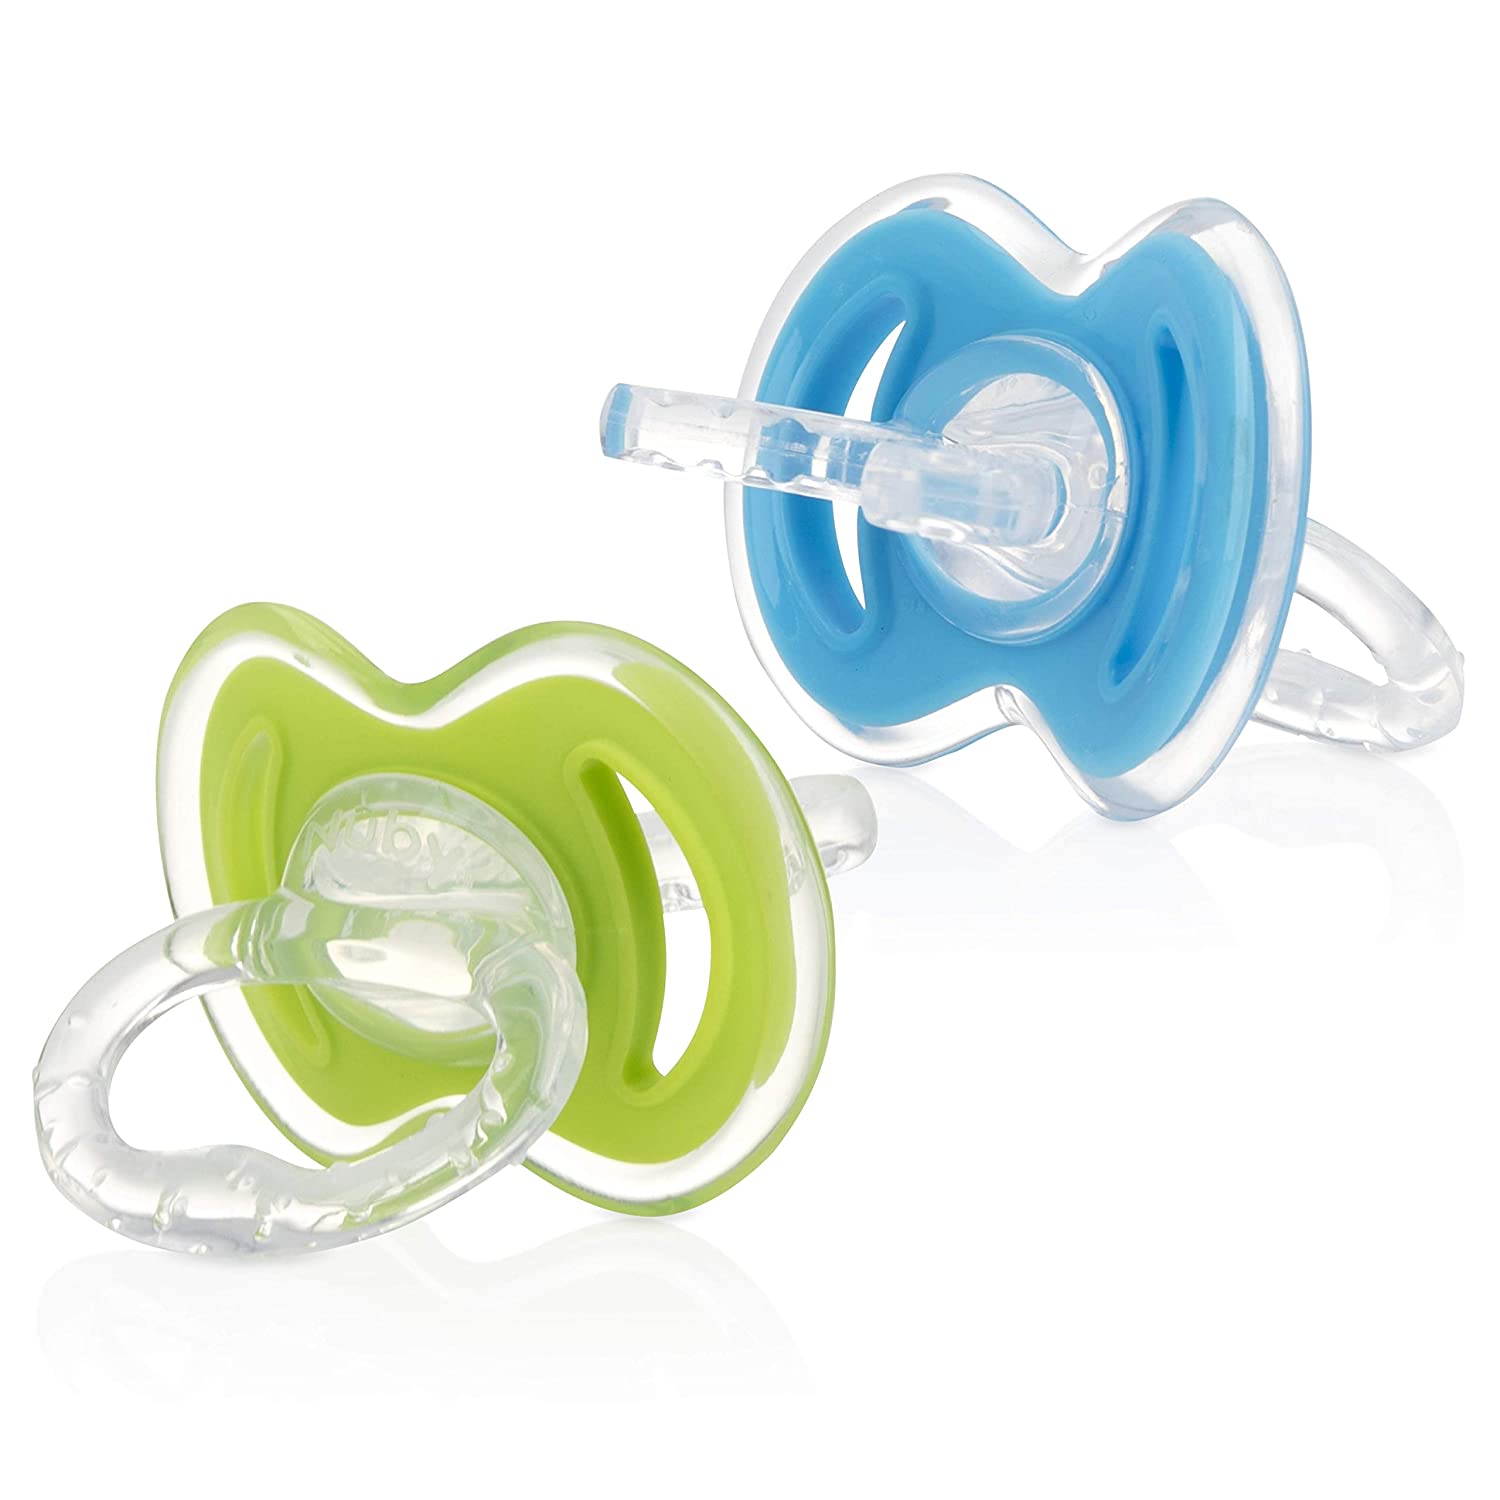 Nuby Gum-eez Silicone Teether & Pacifier, 2-Pack